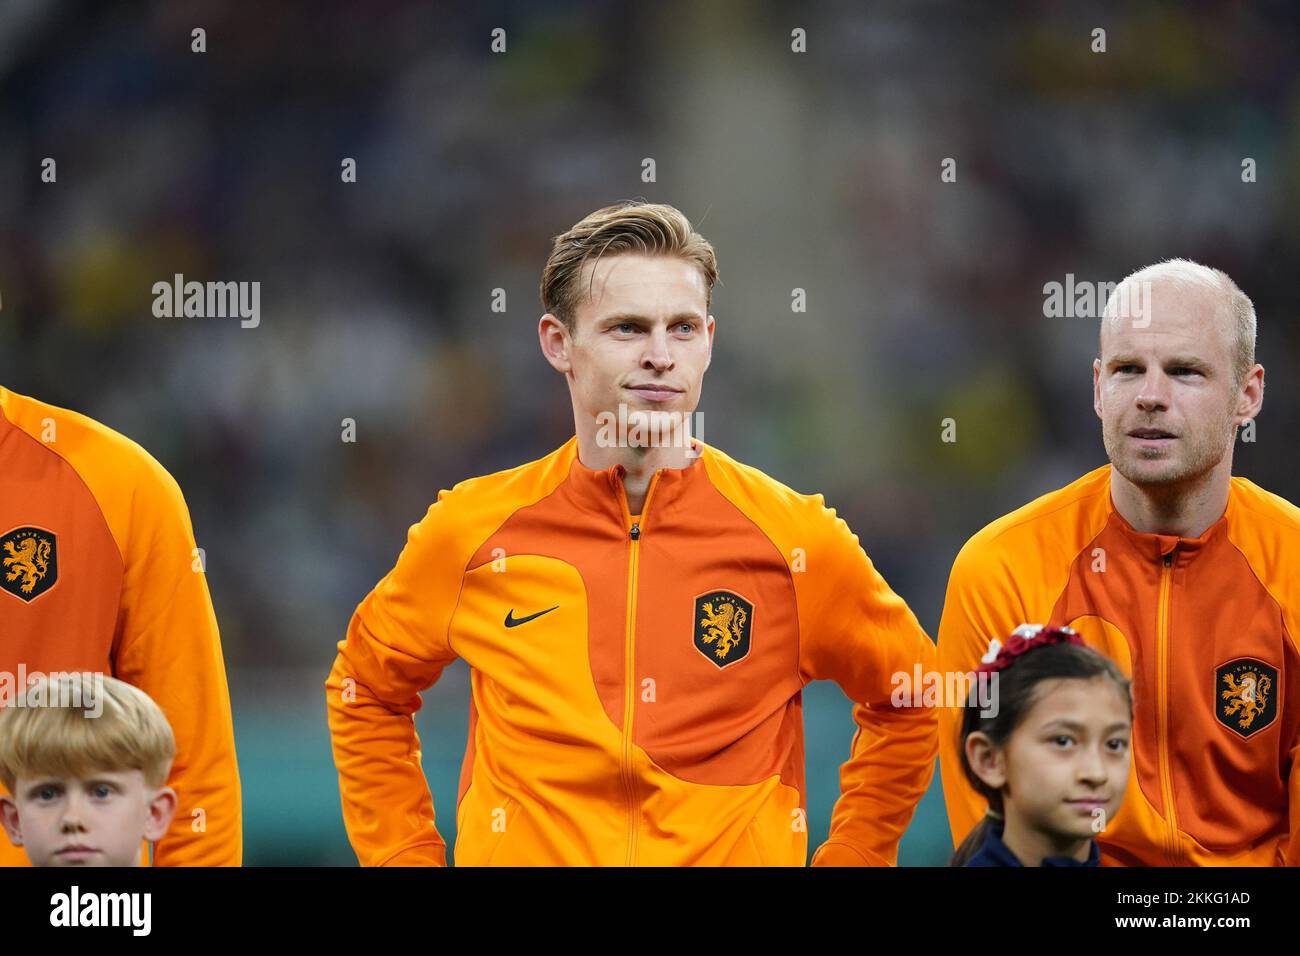 Doha, Qatar. 25th Nov, 2022. DOHA, QATAR - NOVEMBER 25: Player of Netherlands F. de Jong looks on before the FIFA World Cup Qatar 2022 group A match between Netherlands and Ecuador at Khalifa International Stadium on November 25, 2022 in Doha, Qatar. (Photo by Florencia Tan Jun/PxImages) Credit: Px Images/Alamy Live News Stock Photo